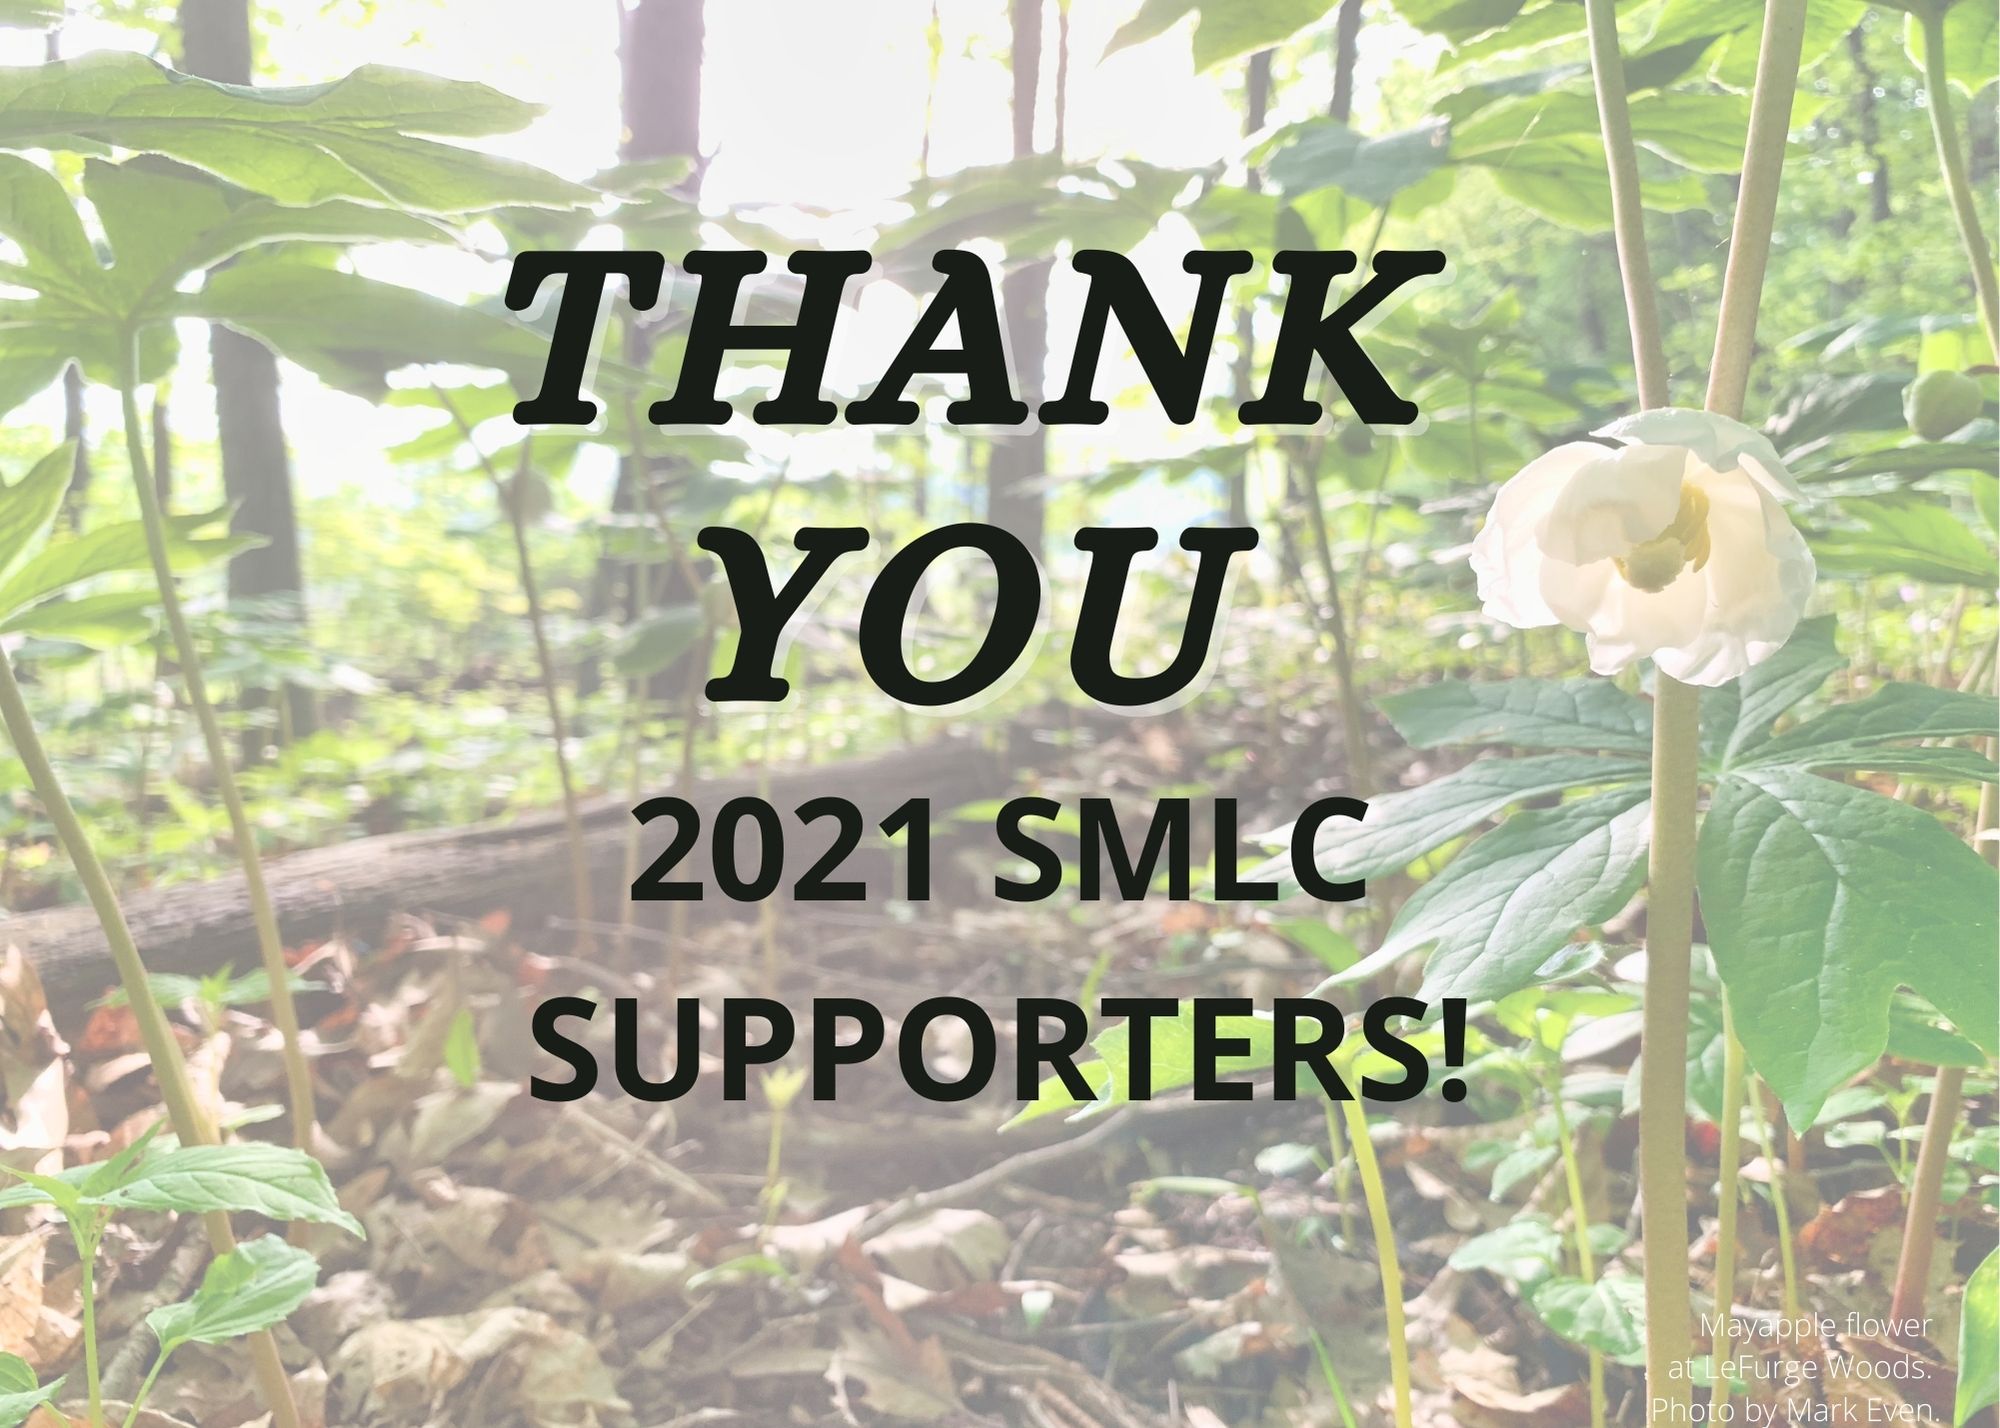 Thank you to all of our supporters in 2021!